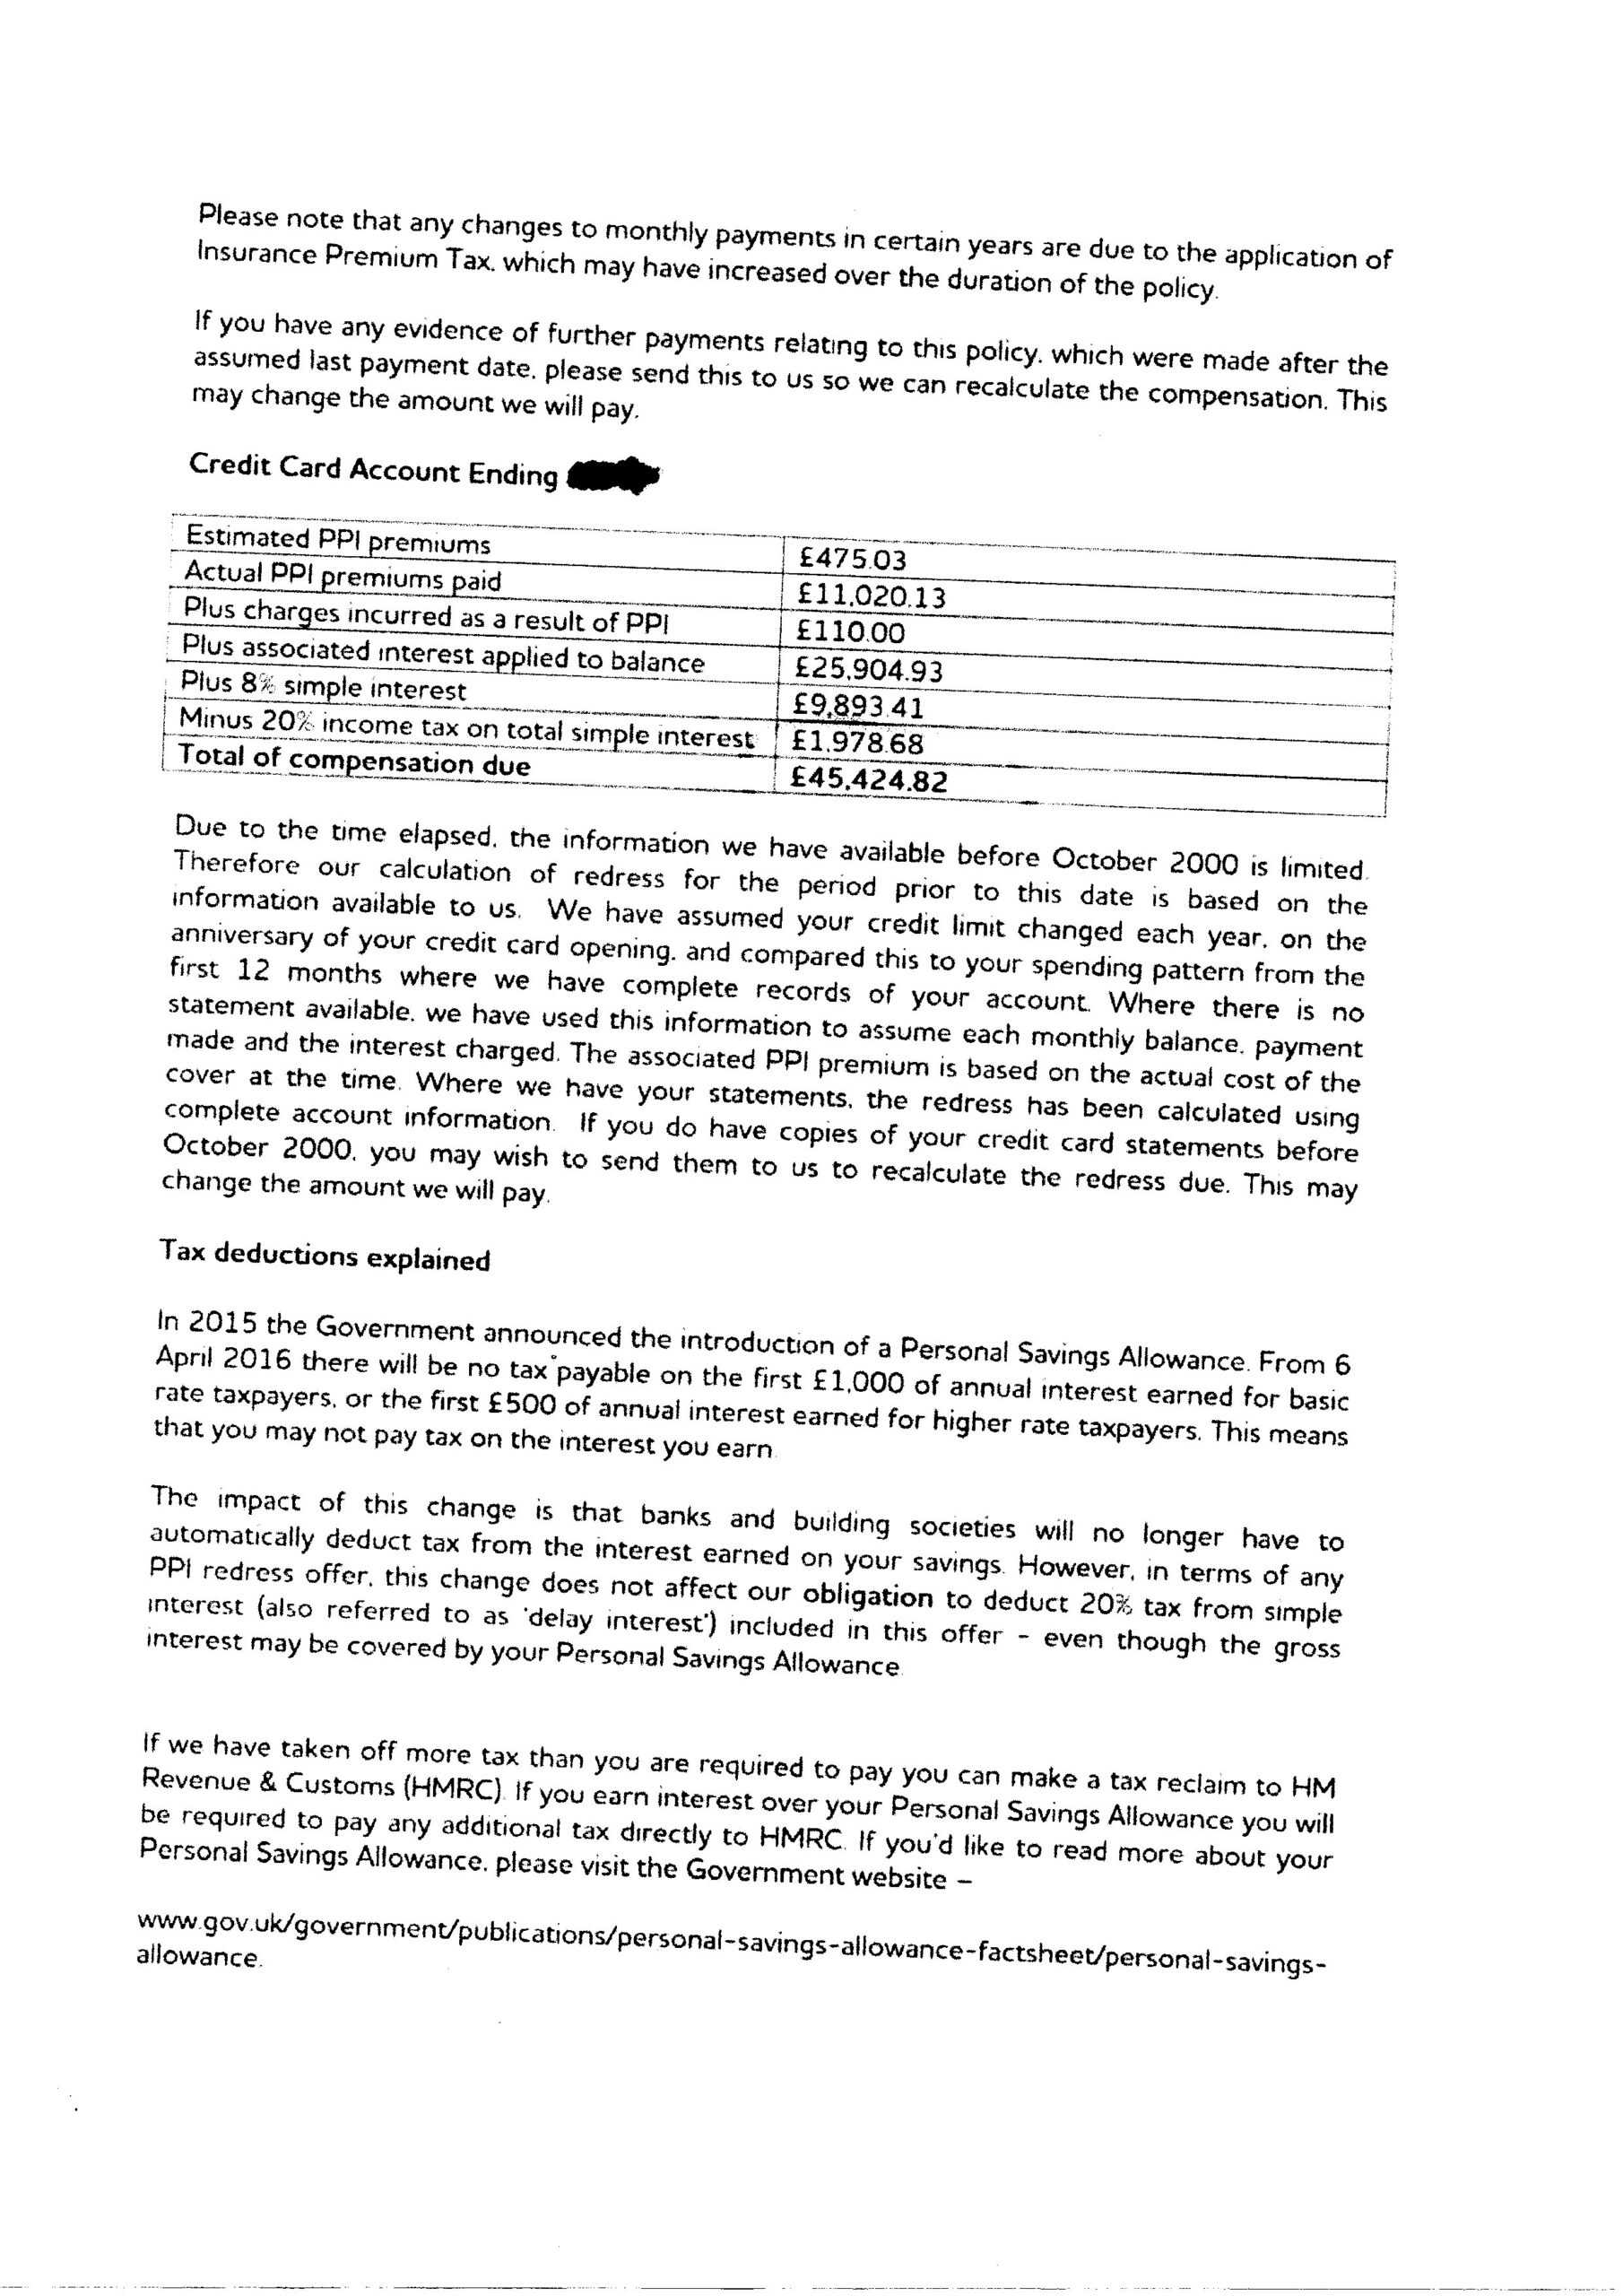 Ppi Claim Letter Hsbc] Http Iotobucket Albums Psis Claims Intended For Ppi Claim Letter Template For Credit Card